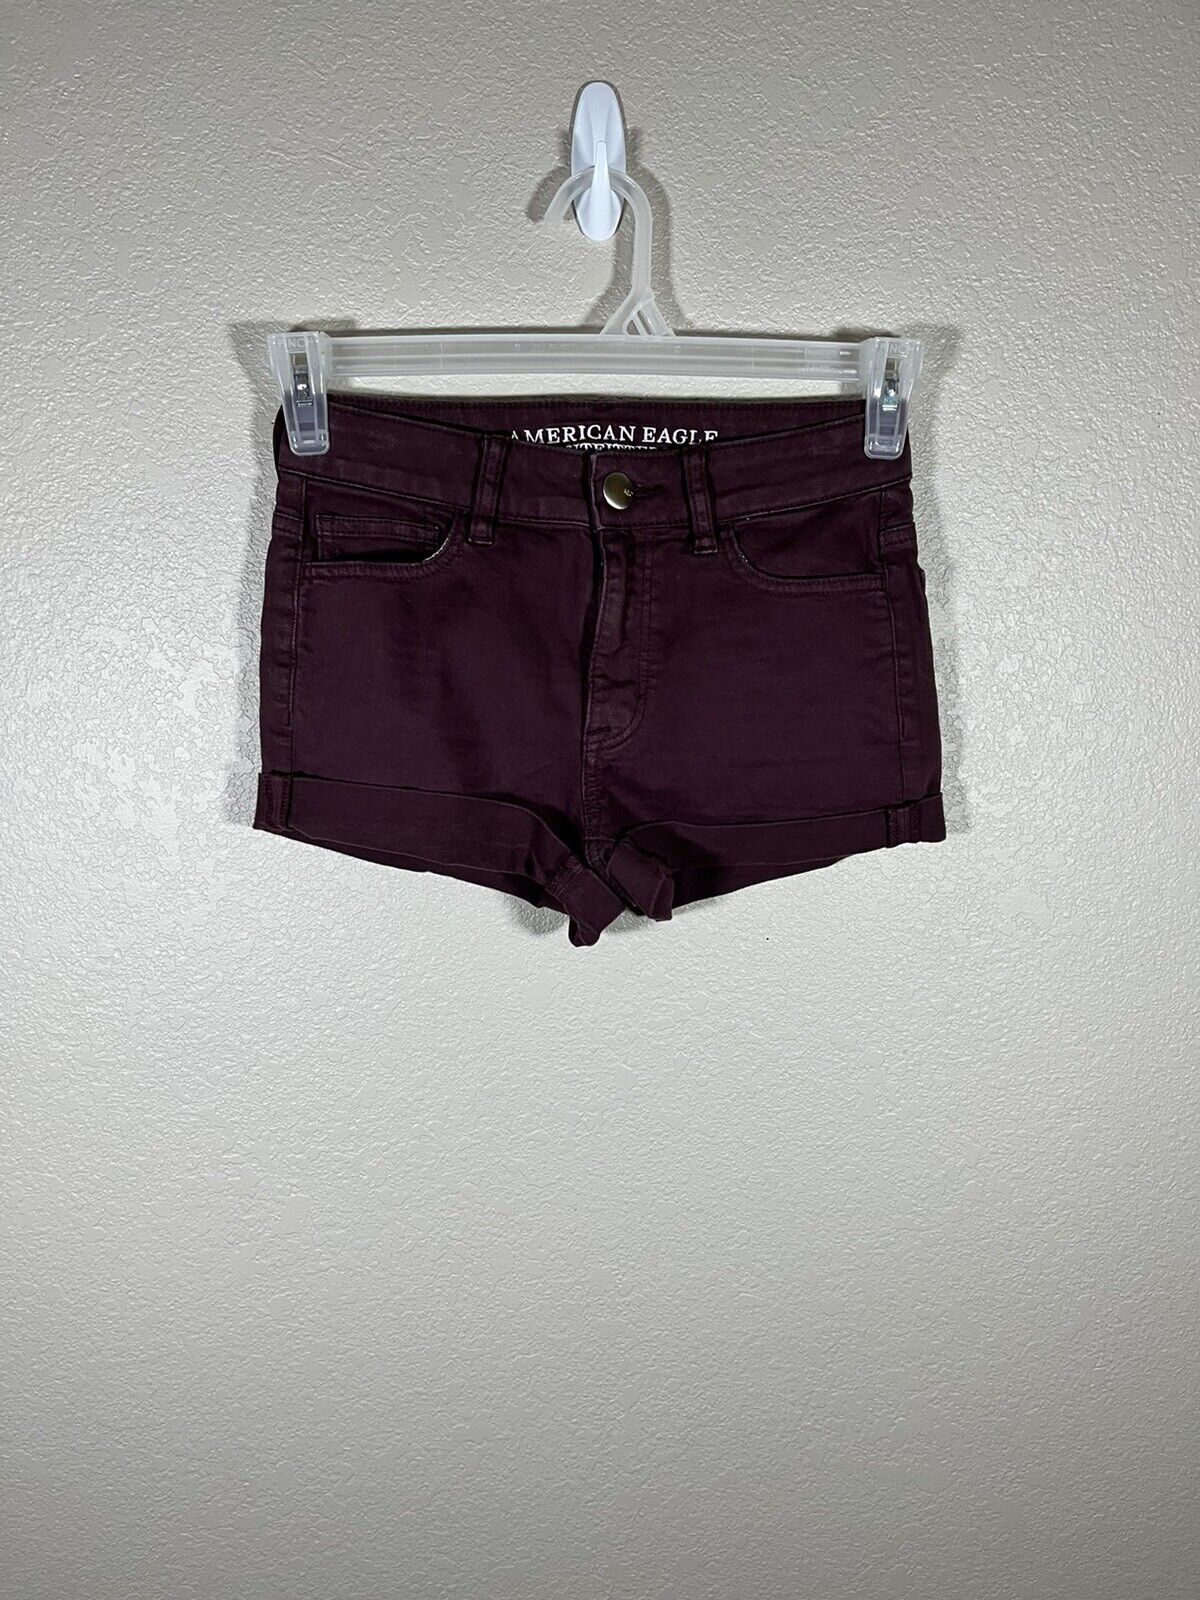 New color American Eagle Maroon New Free Shipping Hi Rise Shorts Shortie Stretch Denim Super